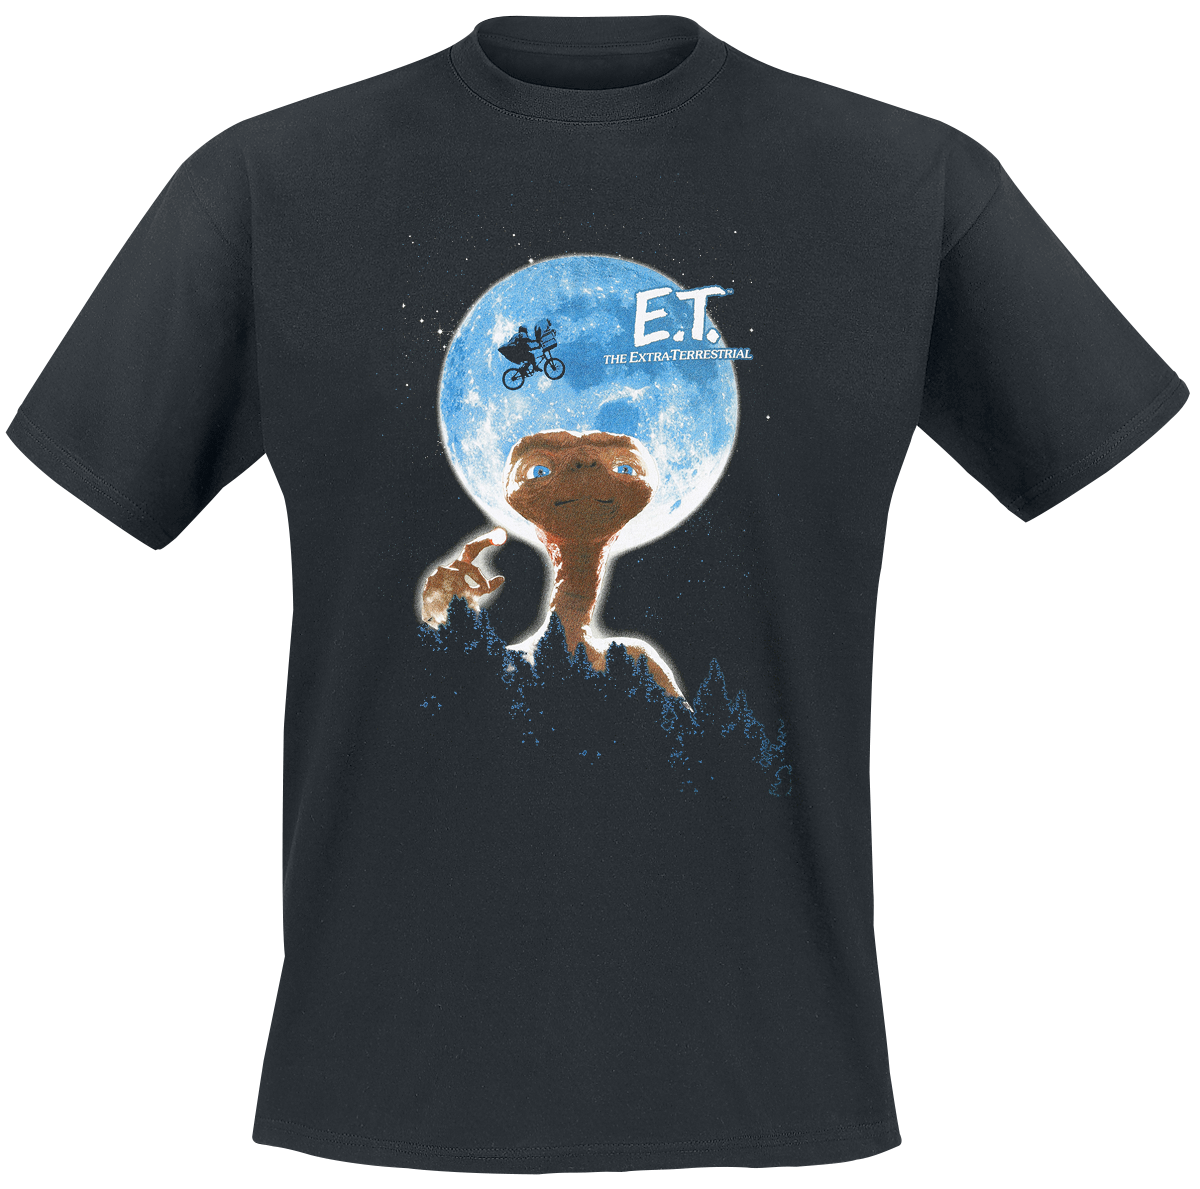 E.T. - the Extra-Terrestrial - Moon - T-Shirt - black image